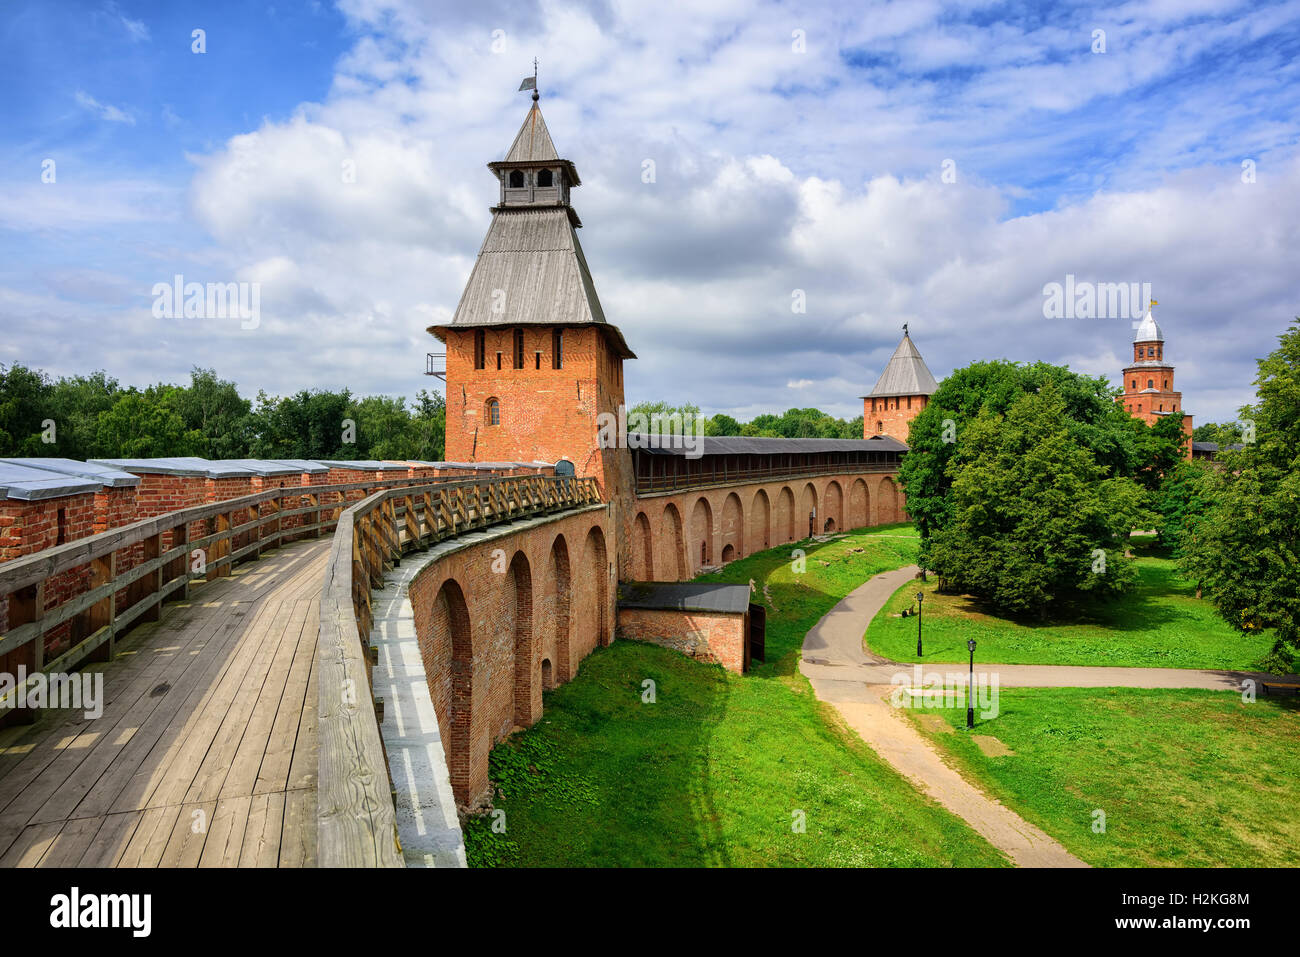 Old town walls and towers of Veliky Novgorod, one of the most important historic cities in Russia Stock Photo